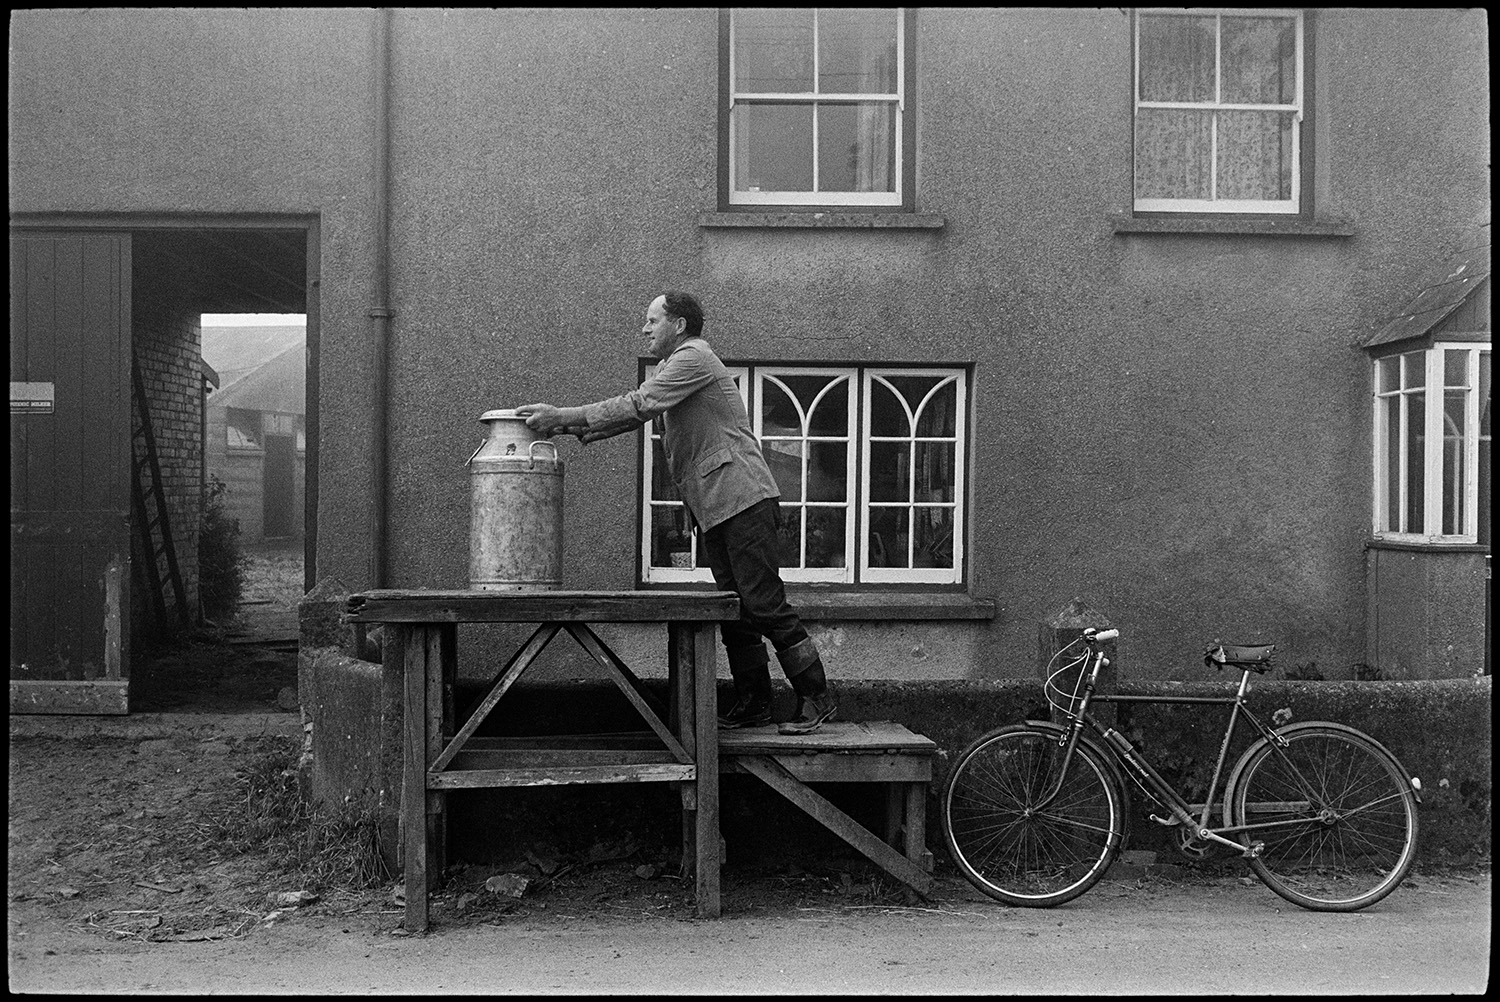 Farmer rolling out milk churn and putting it on stand. 
[Walter Newcombe placing a milk churn on a wooden milk churn stand outside a house with decorative windows, possibly his farmhouse, in East Street, Sheepwash. His bicycle is resting against a wall outside the house.]